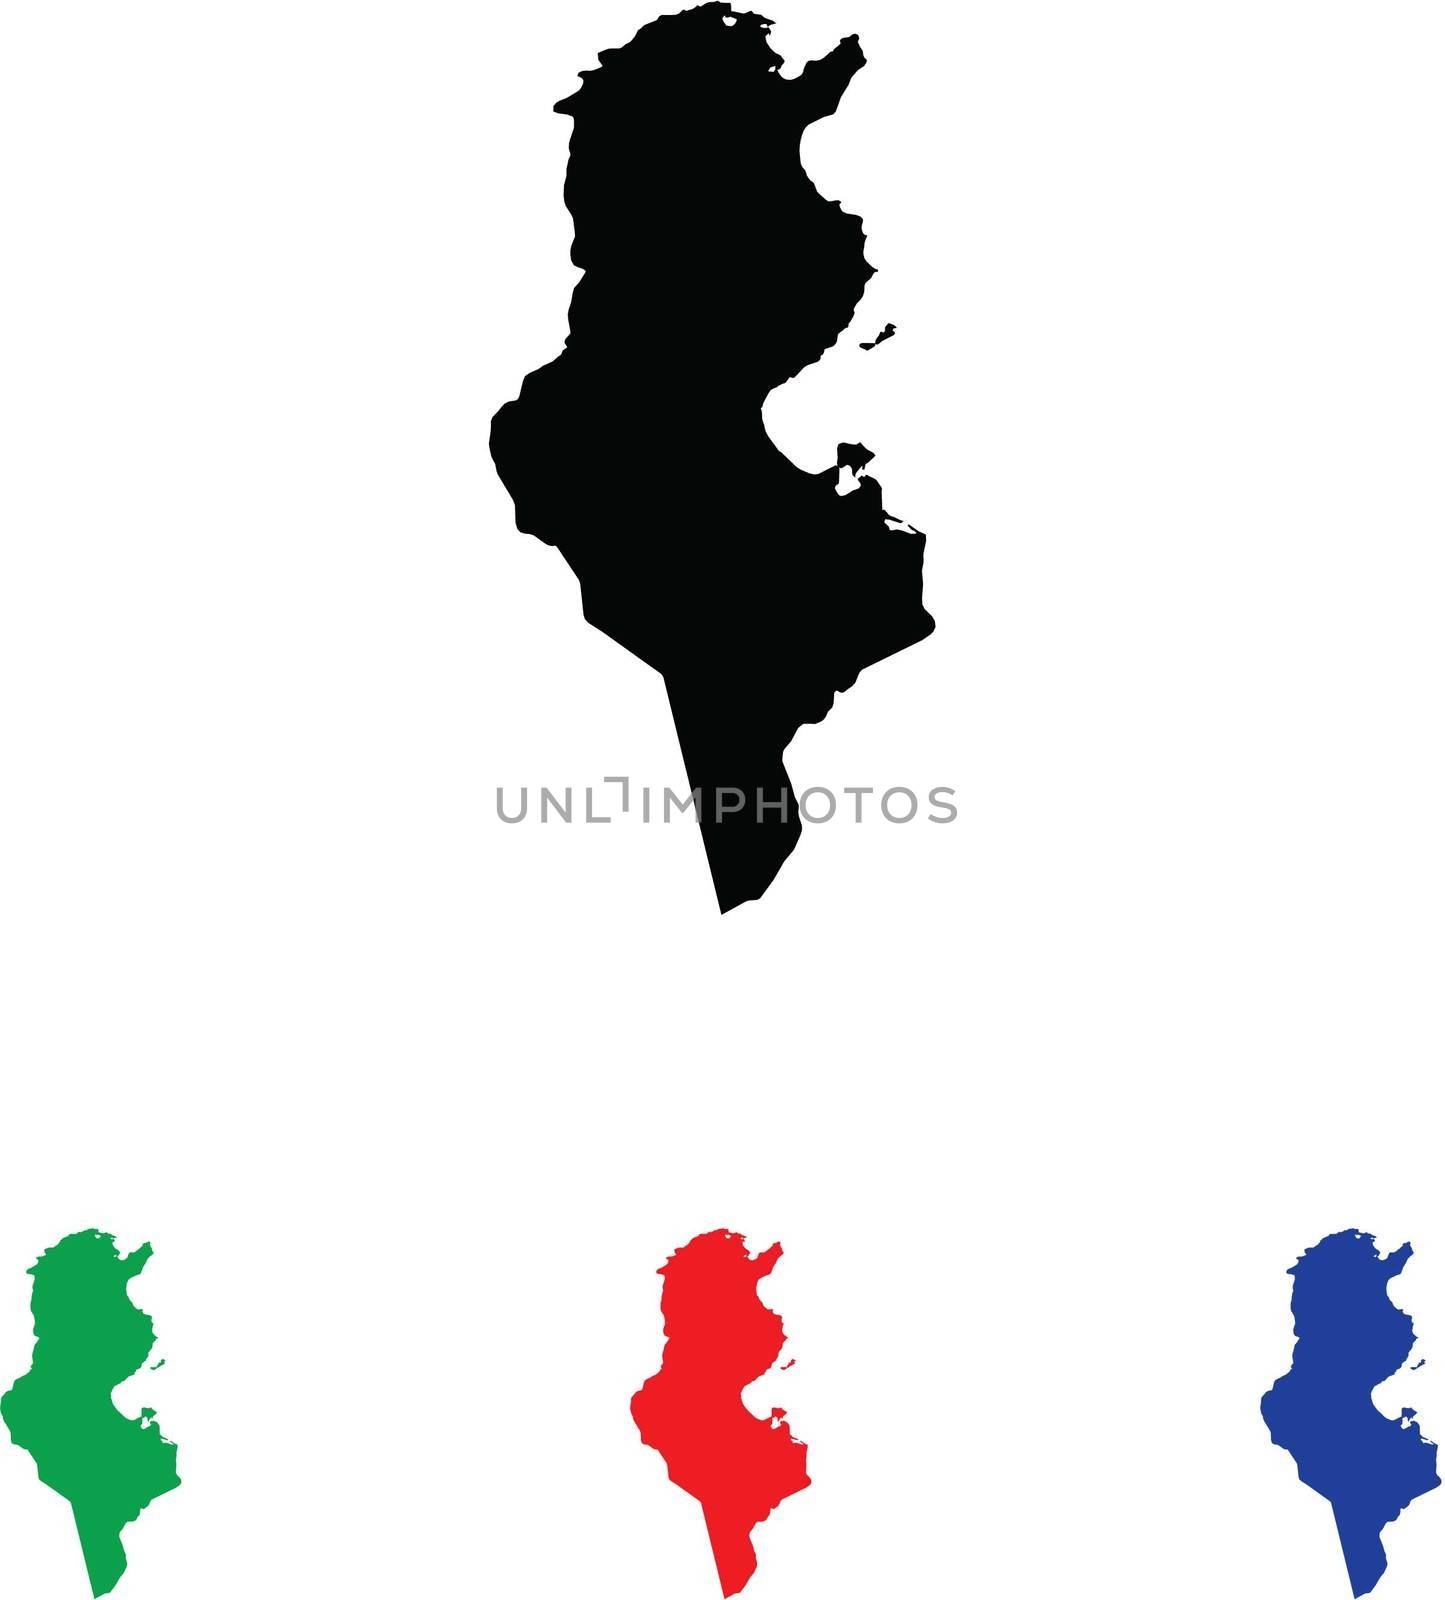 Tunisia Icon Illustration with Four Color Variations